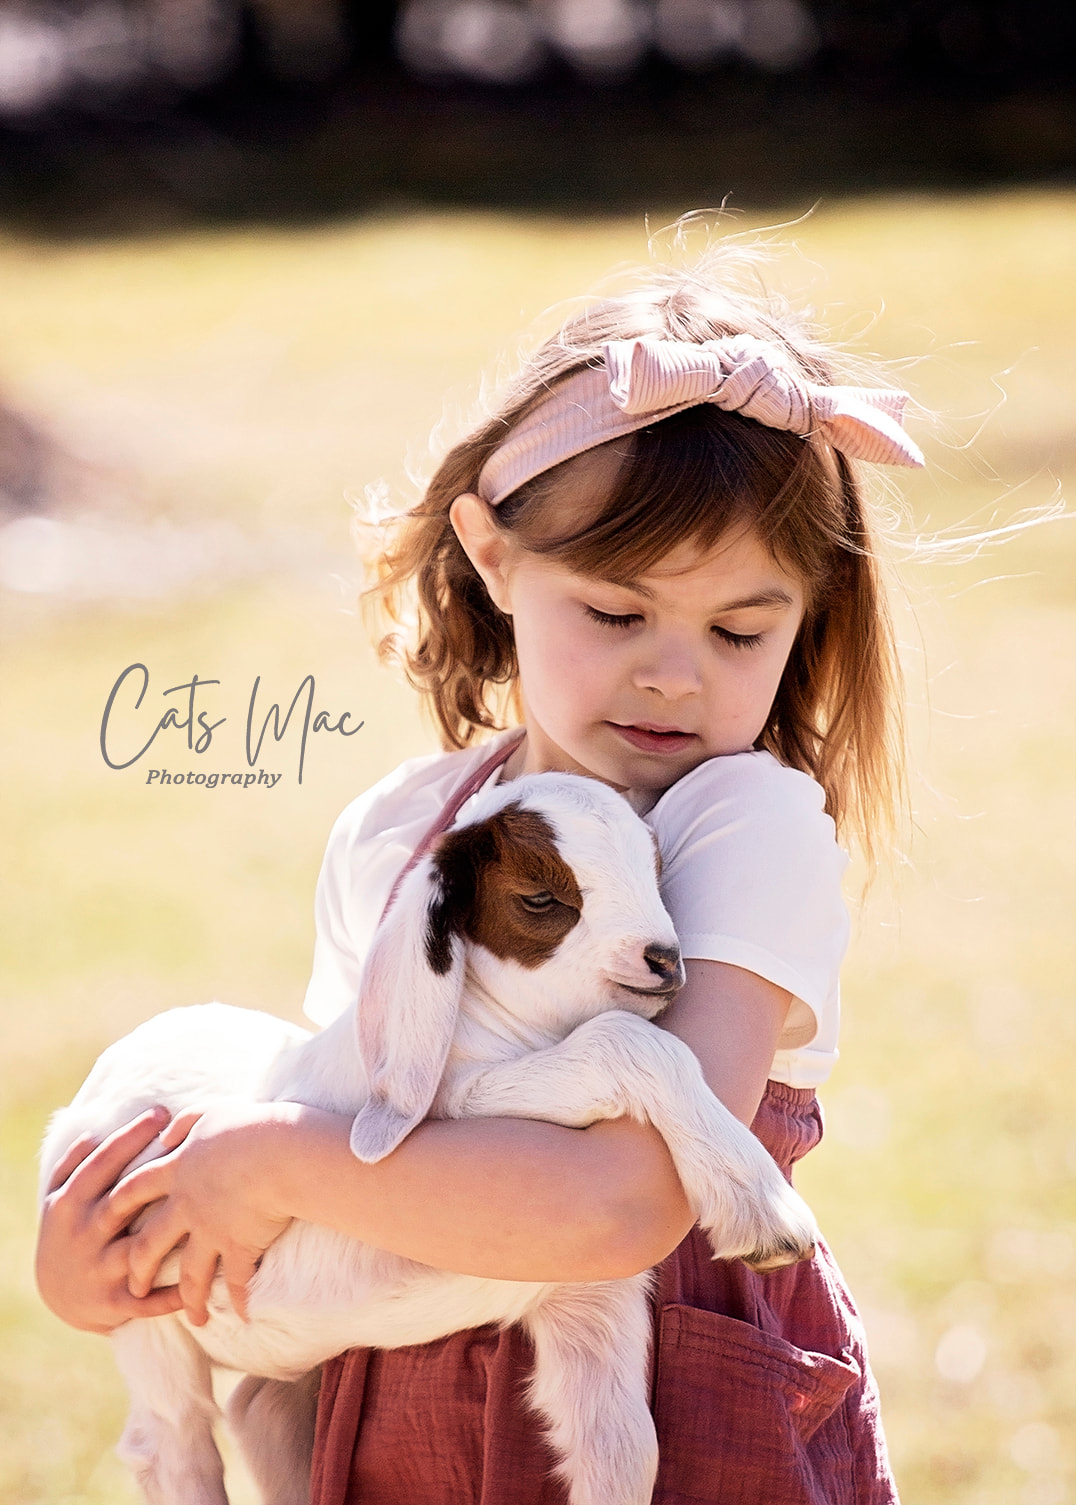 Girl holding a baby goat in her arms and looking down at the goat's eyes